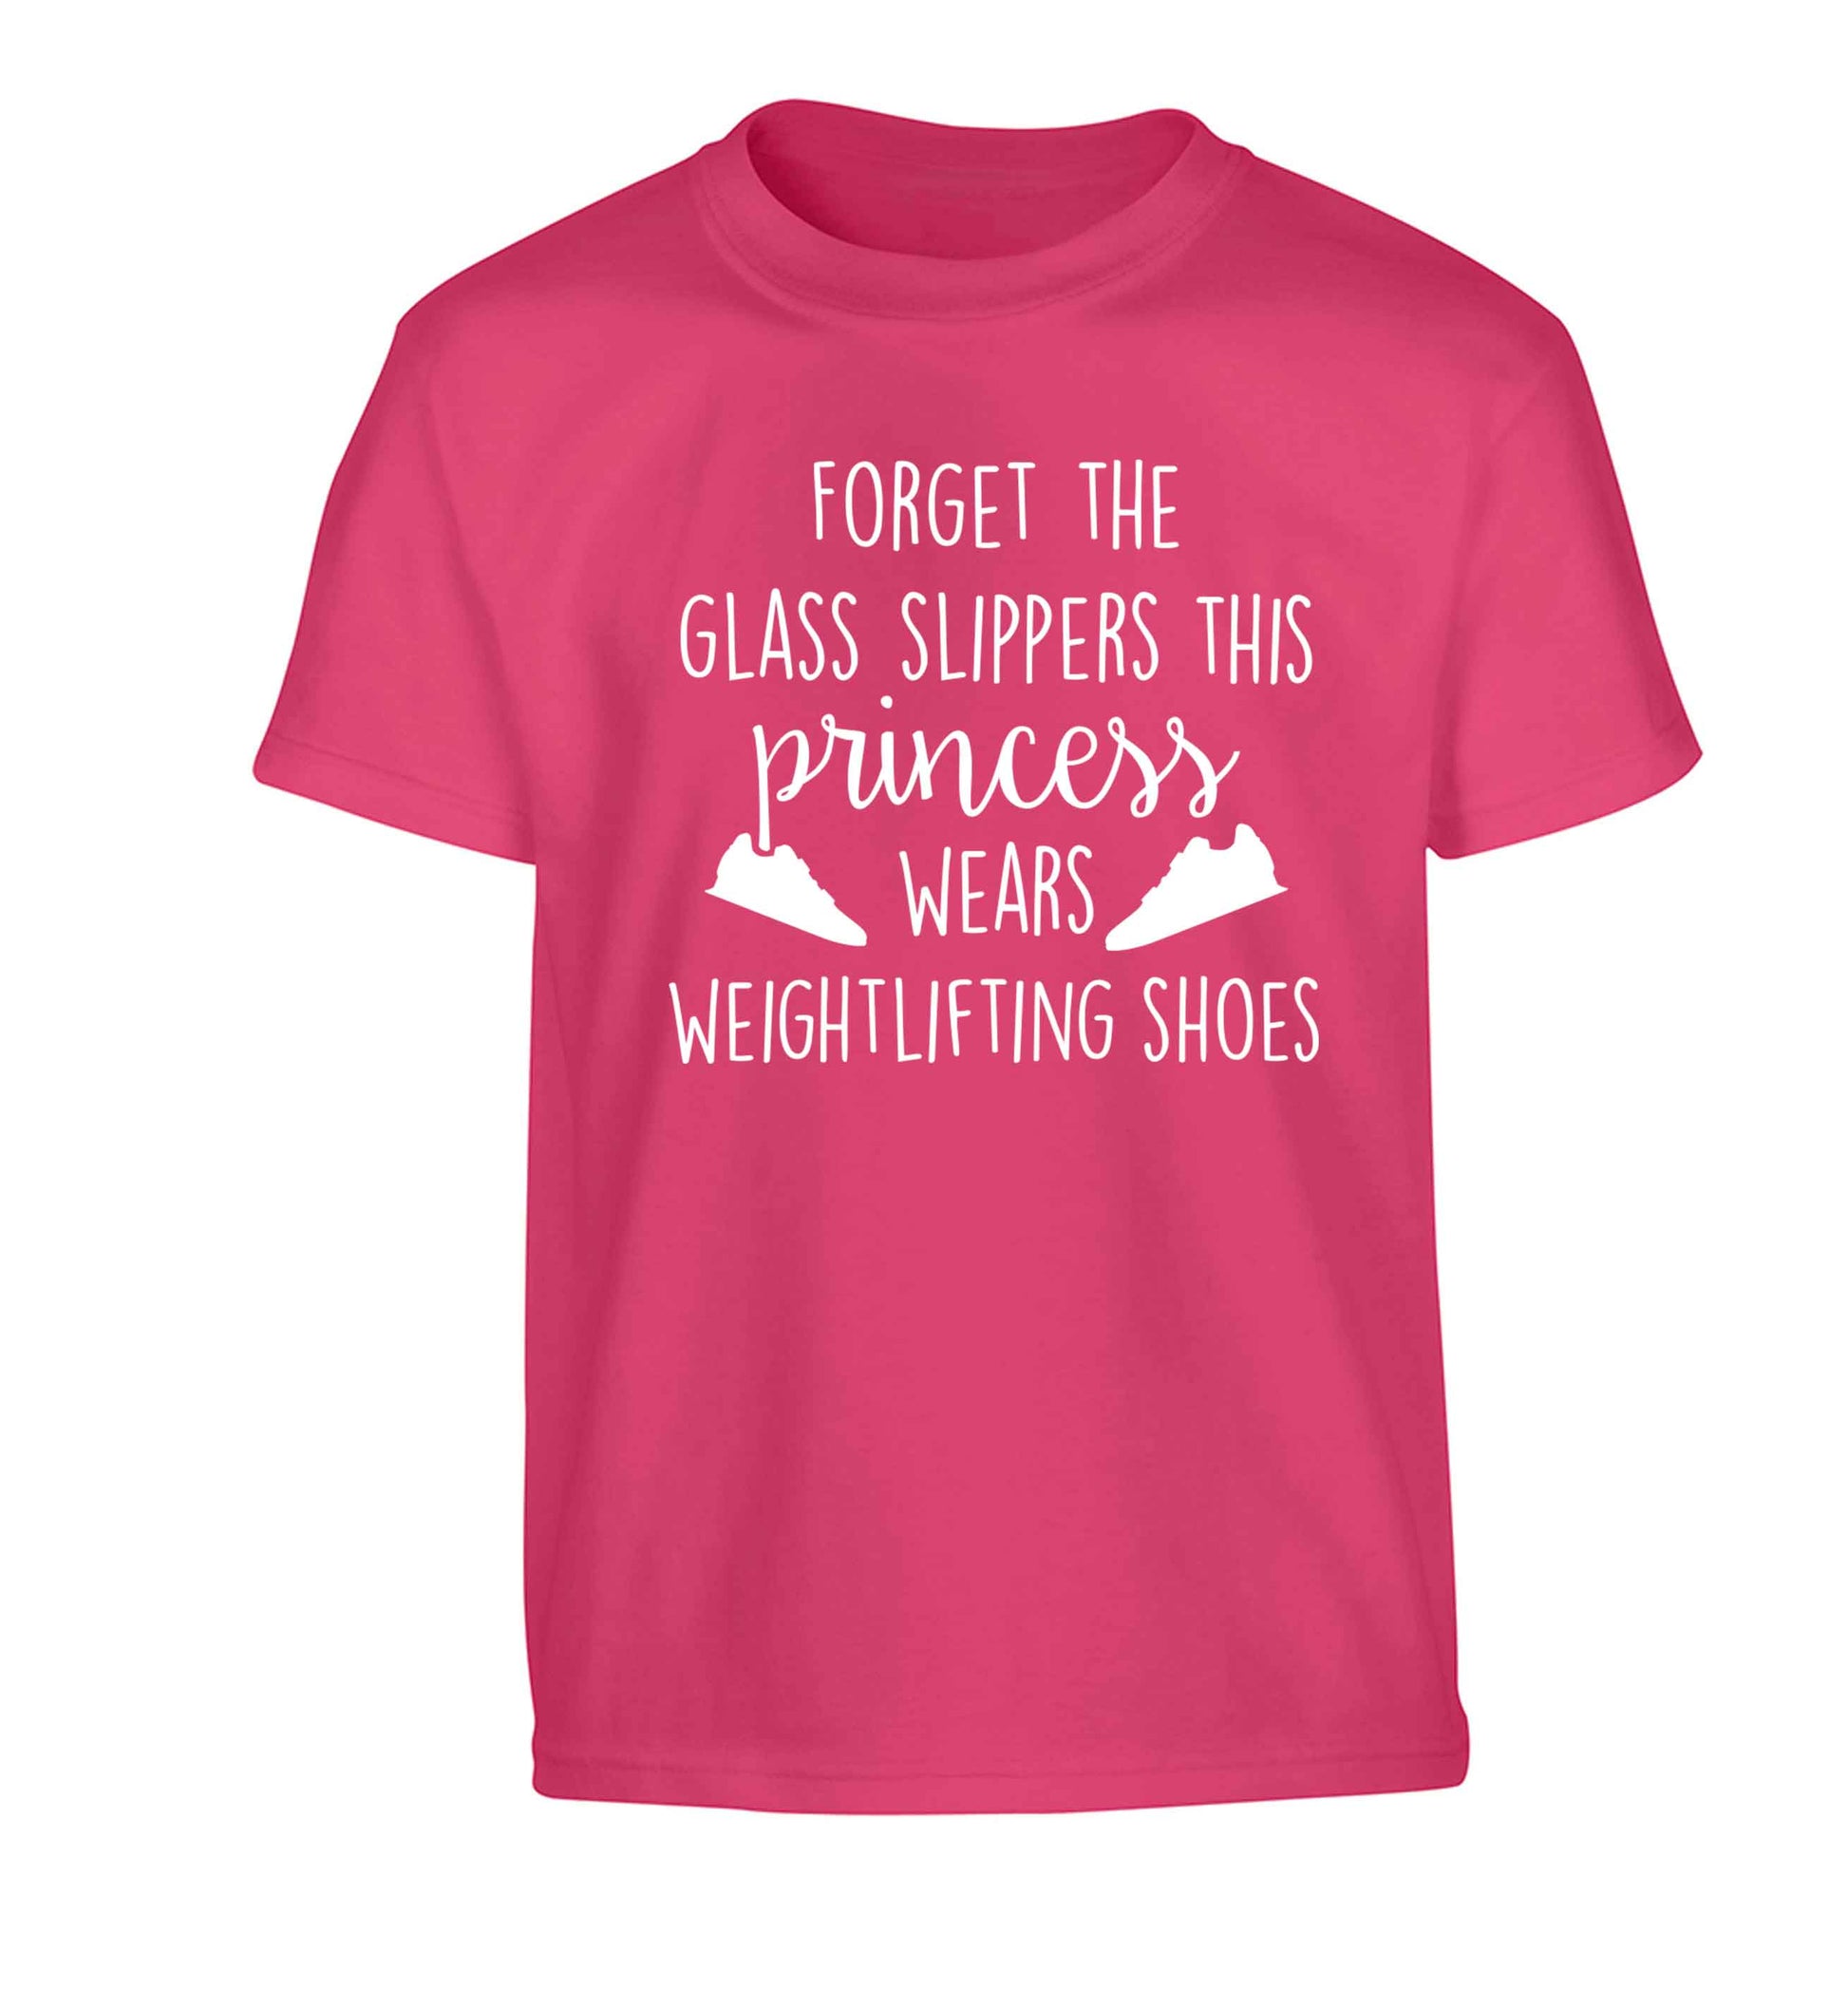 Forget the glass slippers this princess wears weightlifting shoes Children's pink Tshirt 12-13 Years